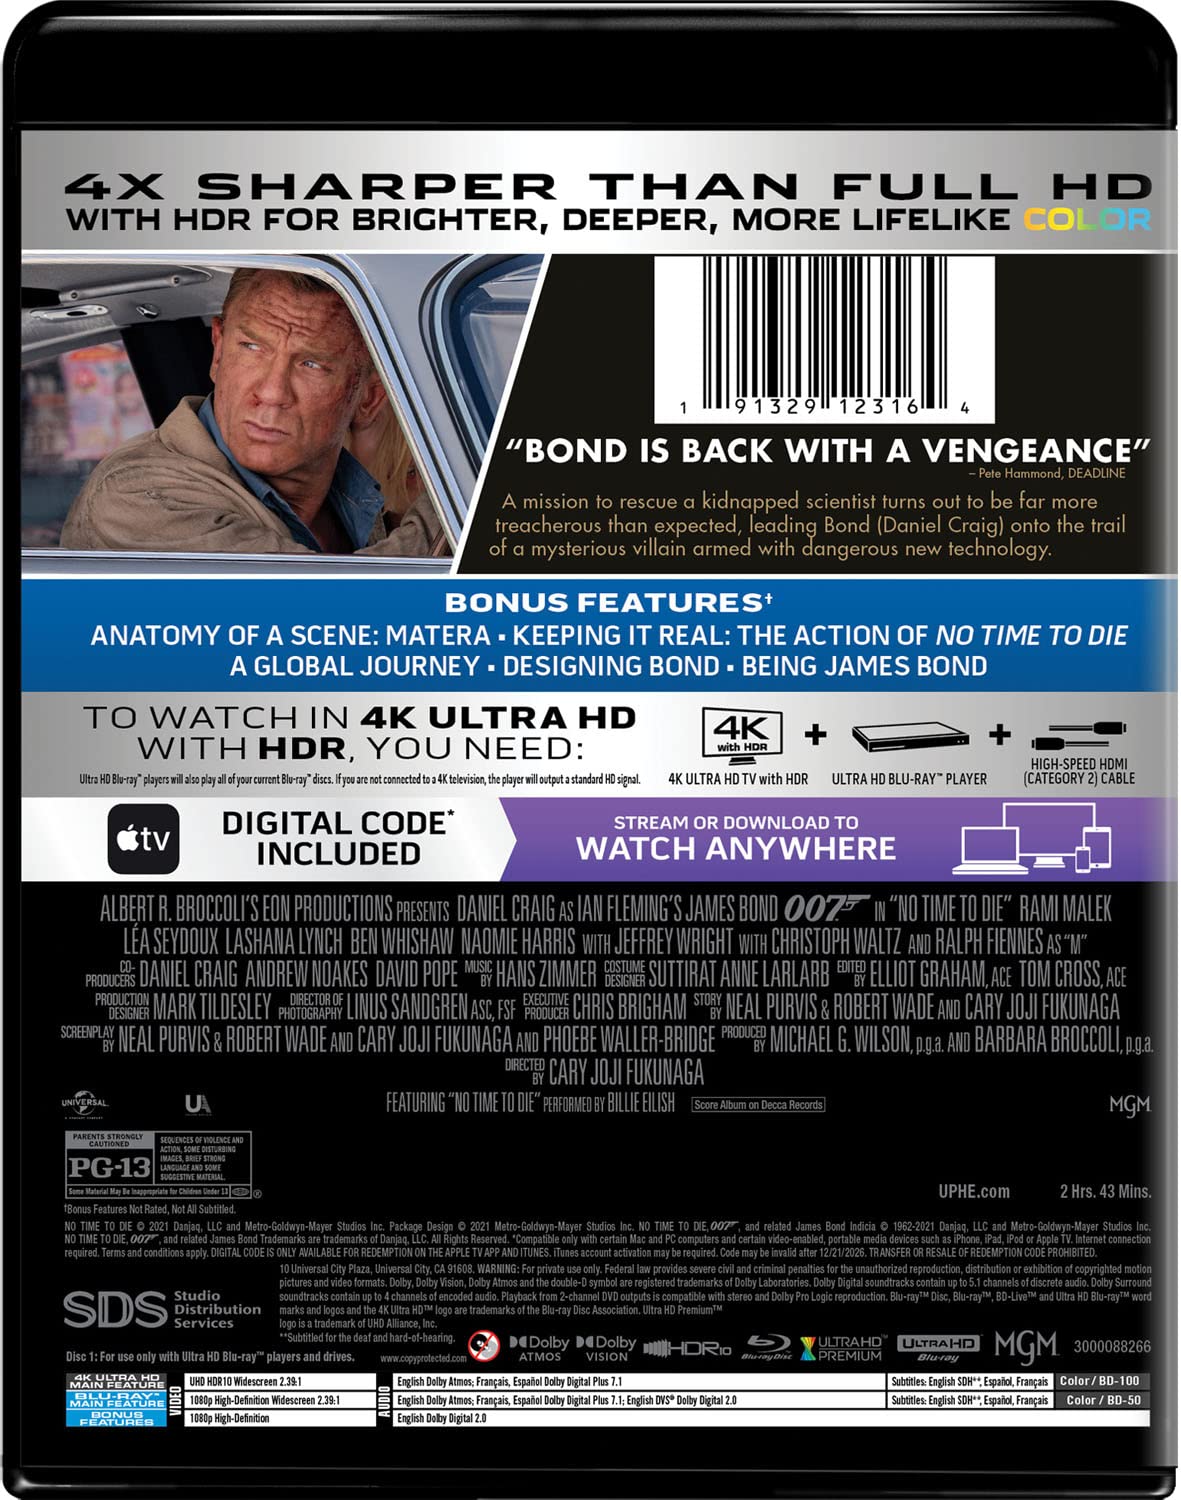 No Time to Die 4k Blu-ray back